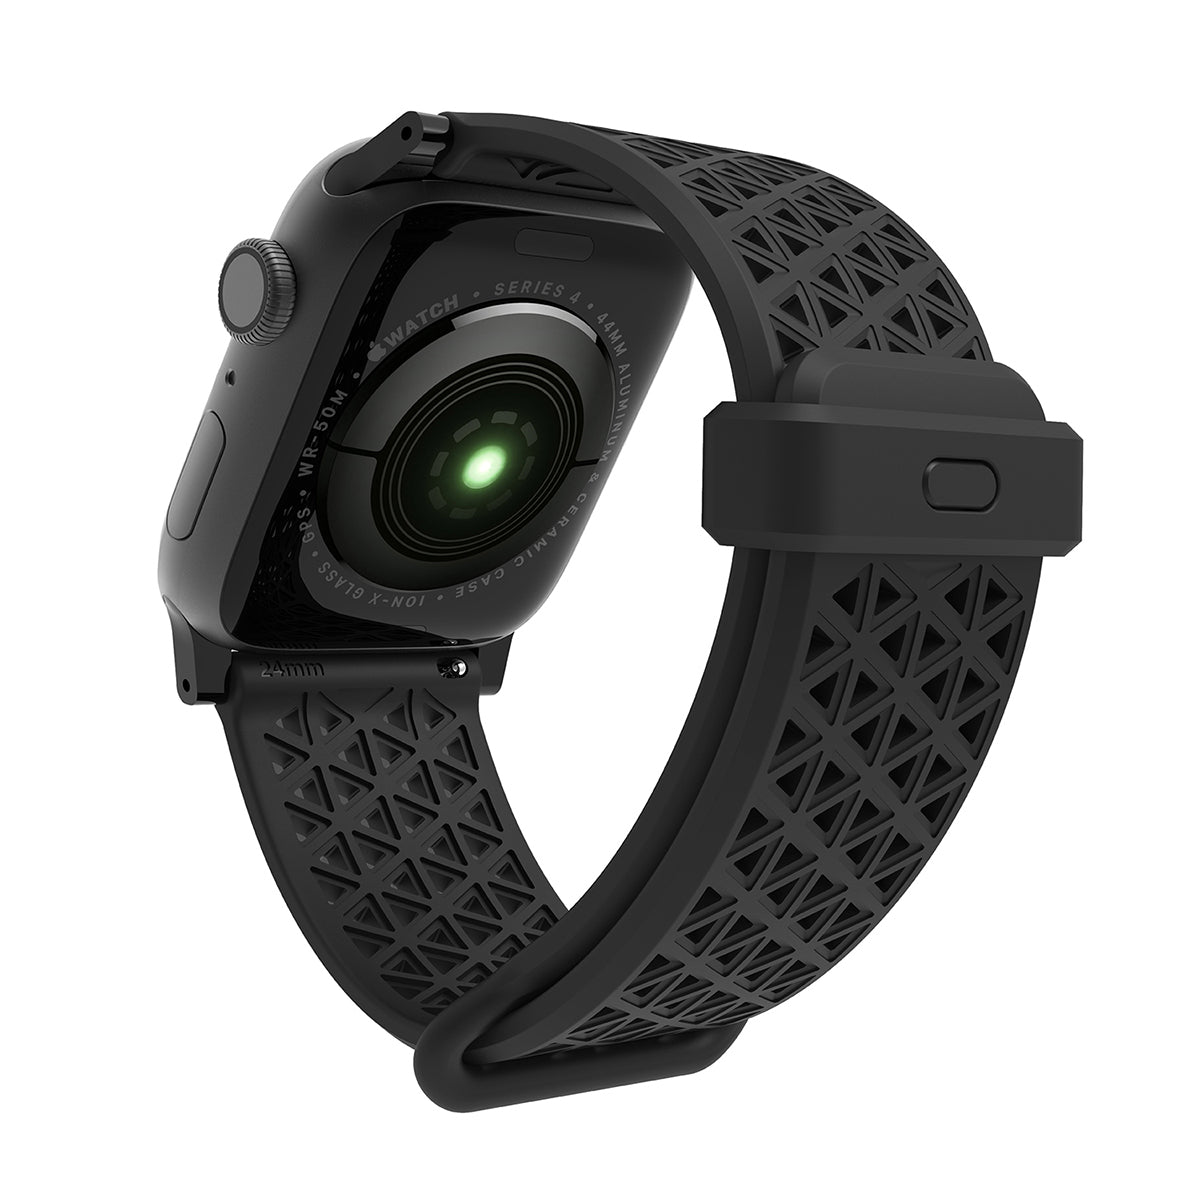 CAT42SBBLK | Catalyst Sport Band for 42 & 44MM Apple Watch